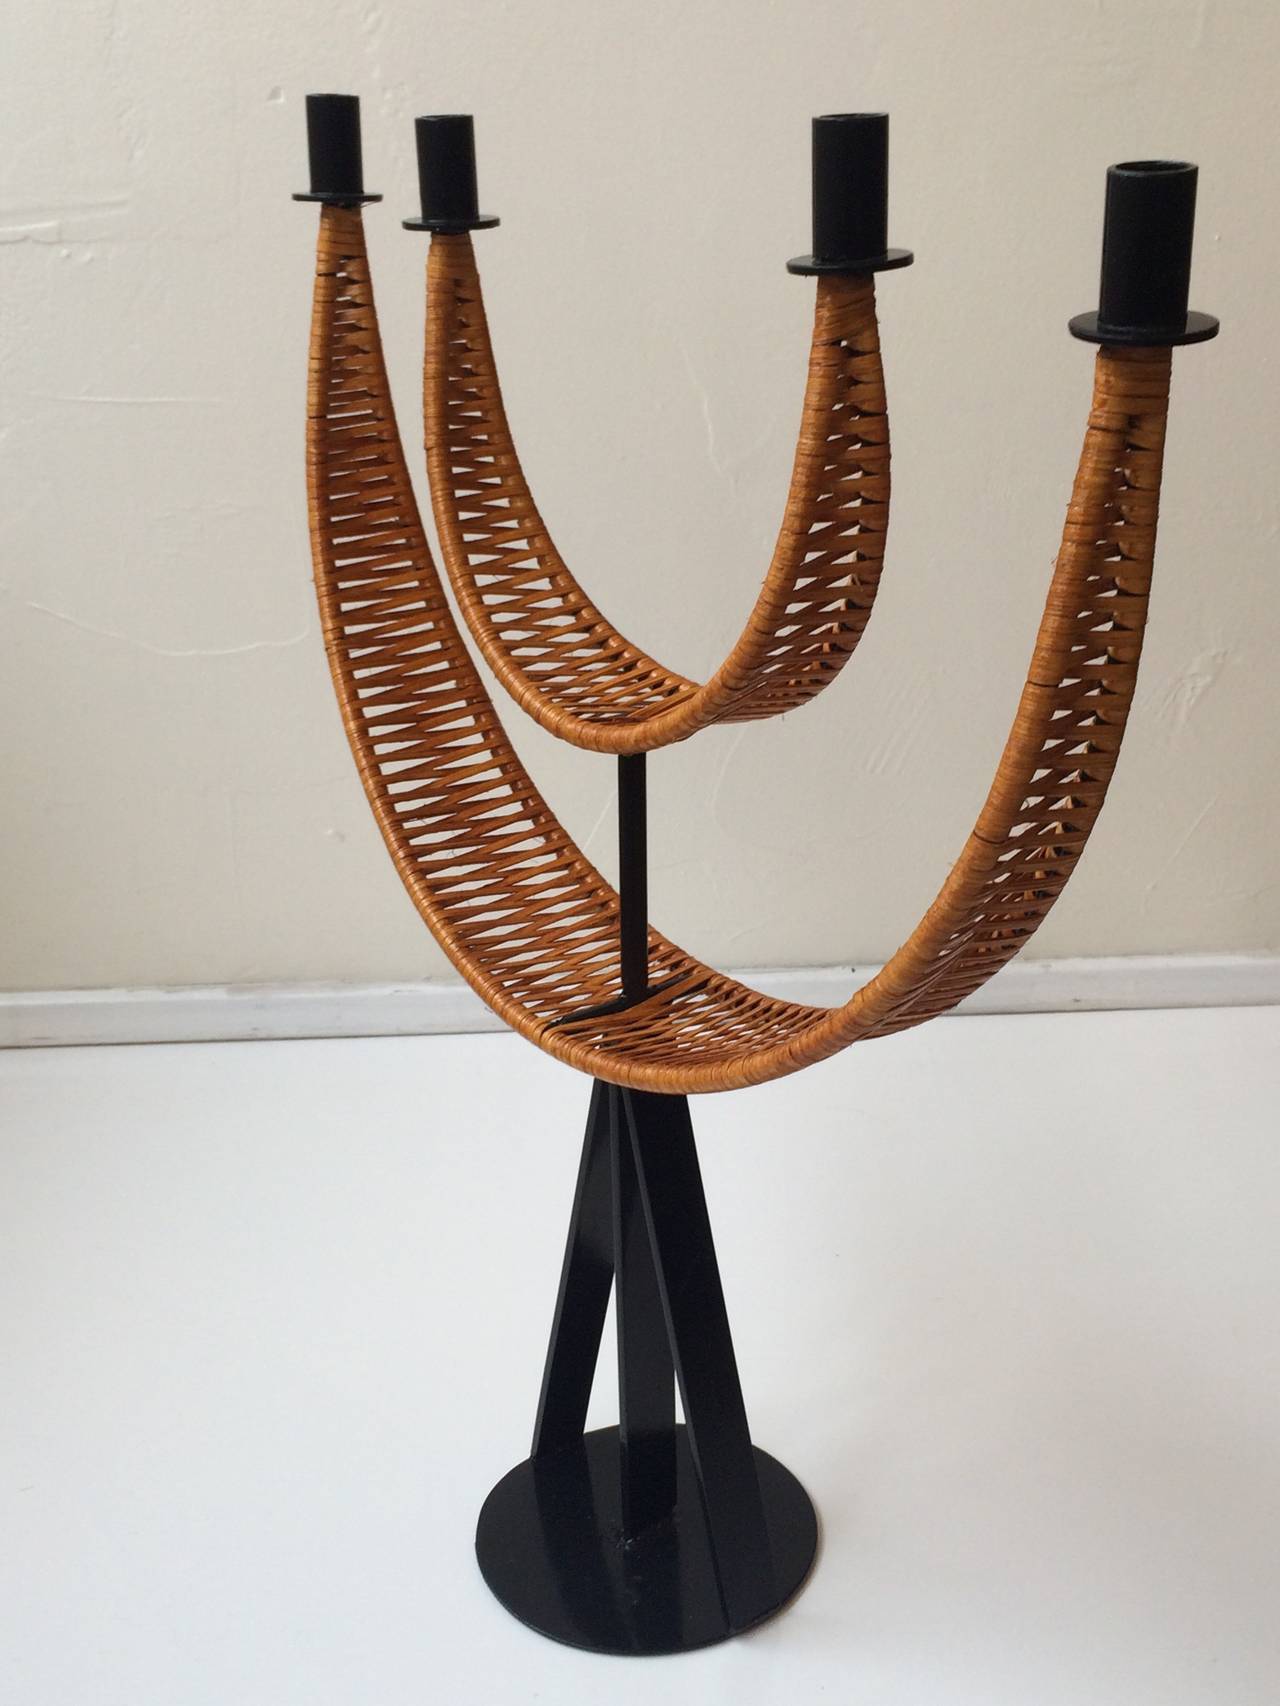 American Woven Cane Wrapped Candelabra designed by Arthur Umanoff